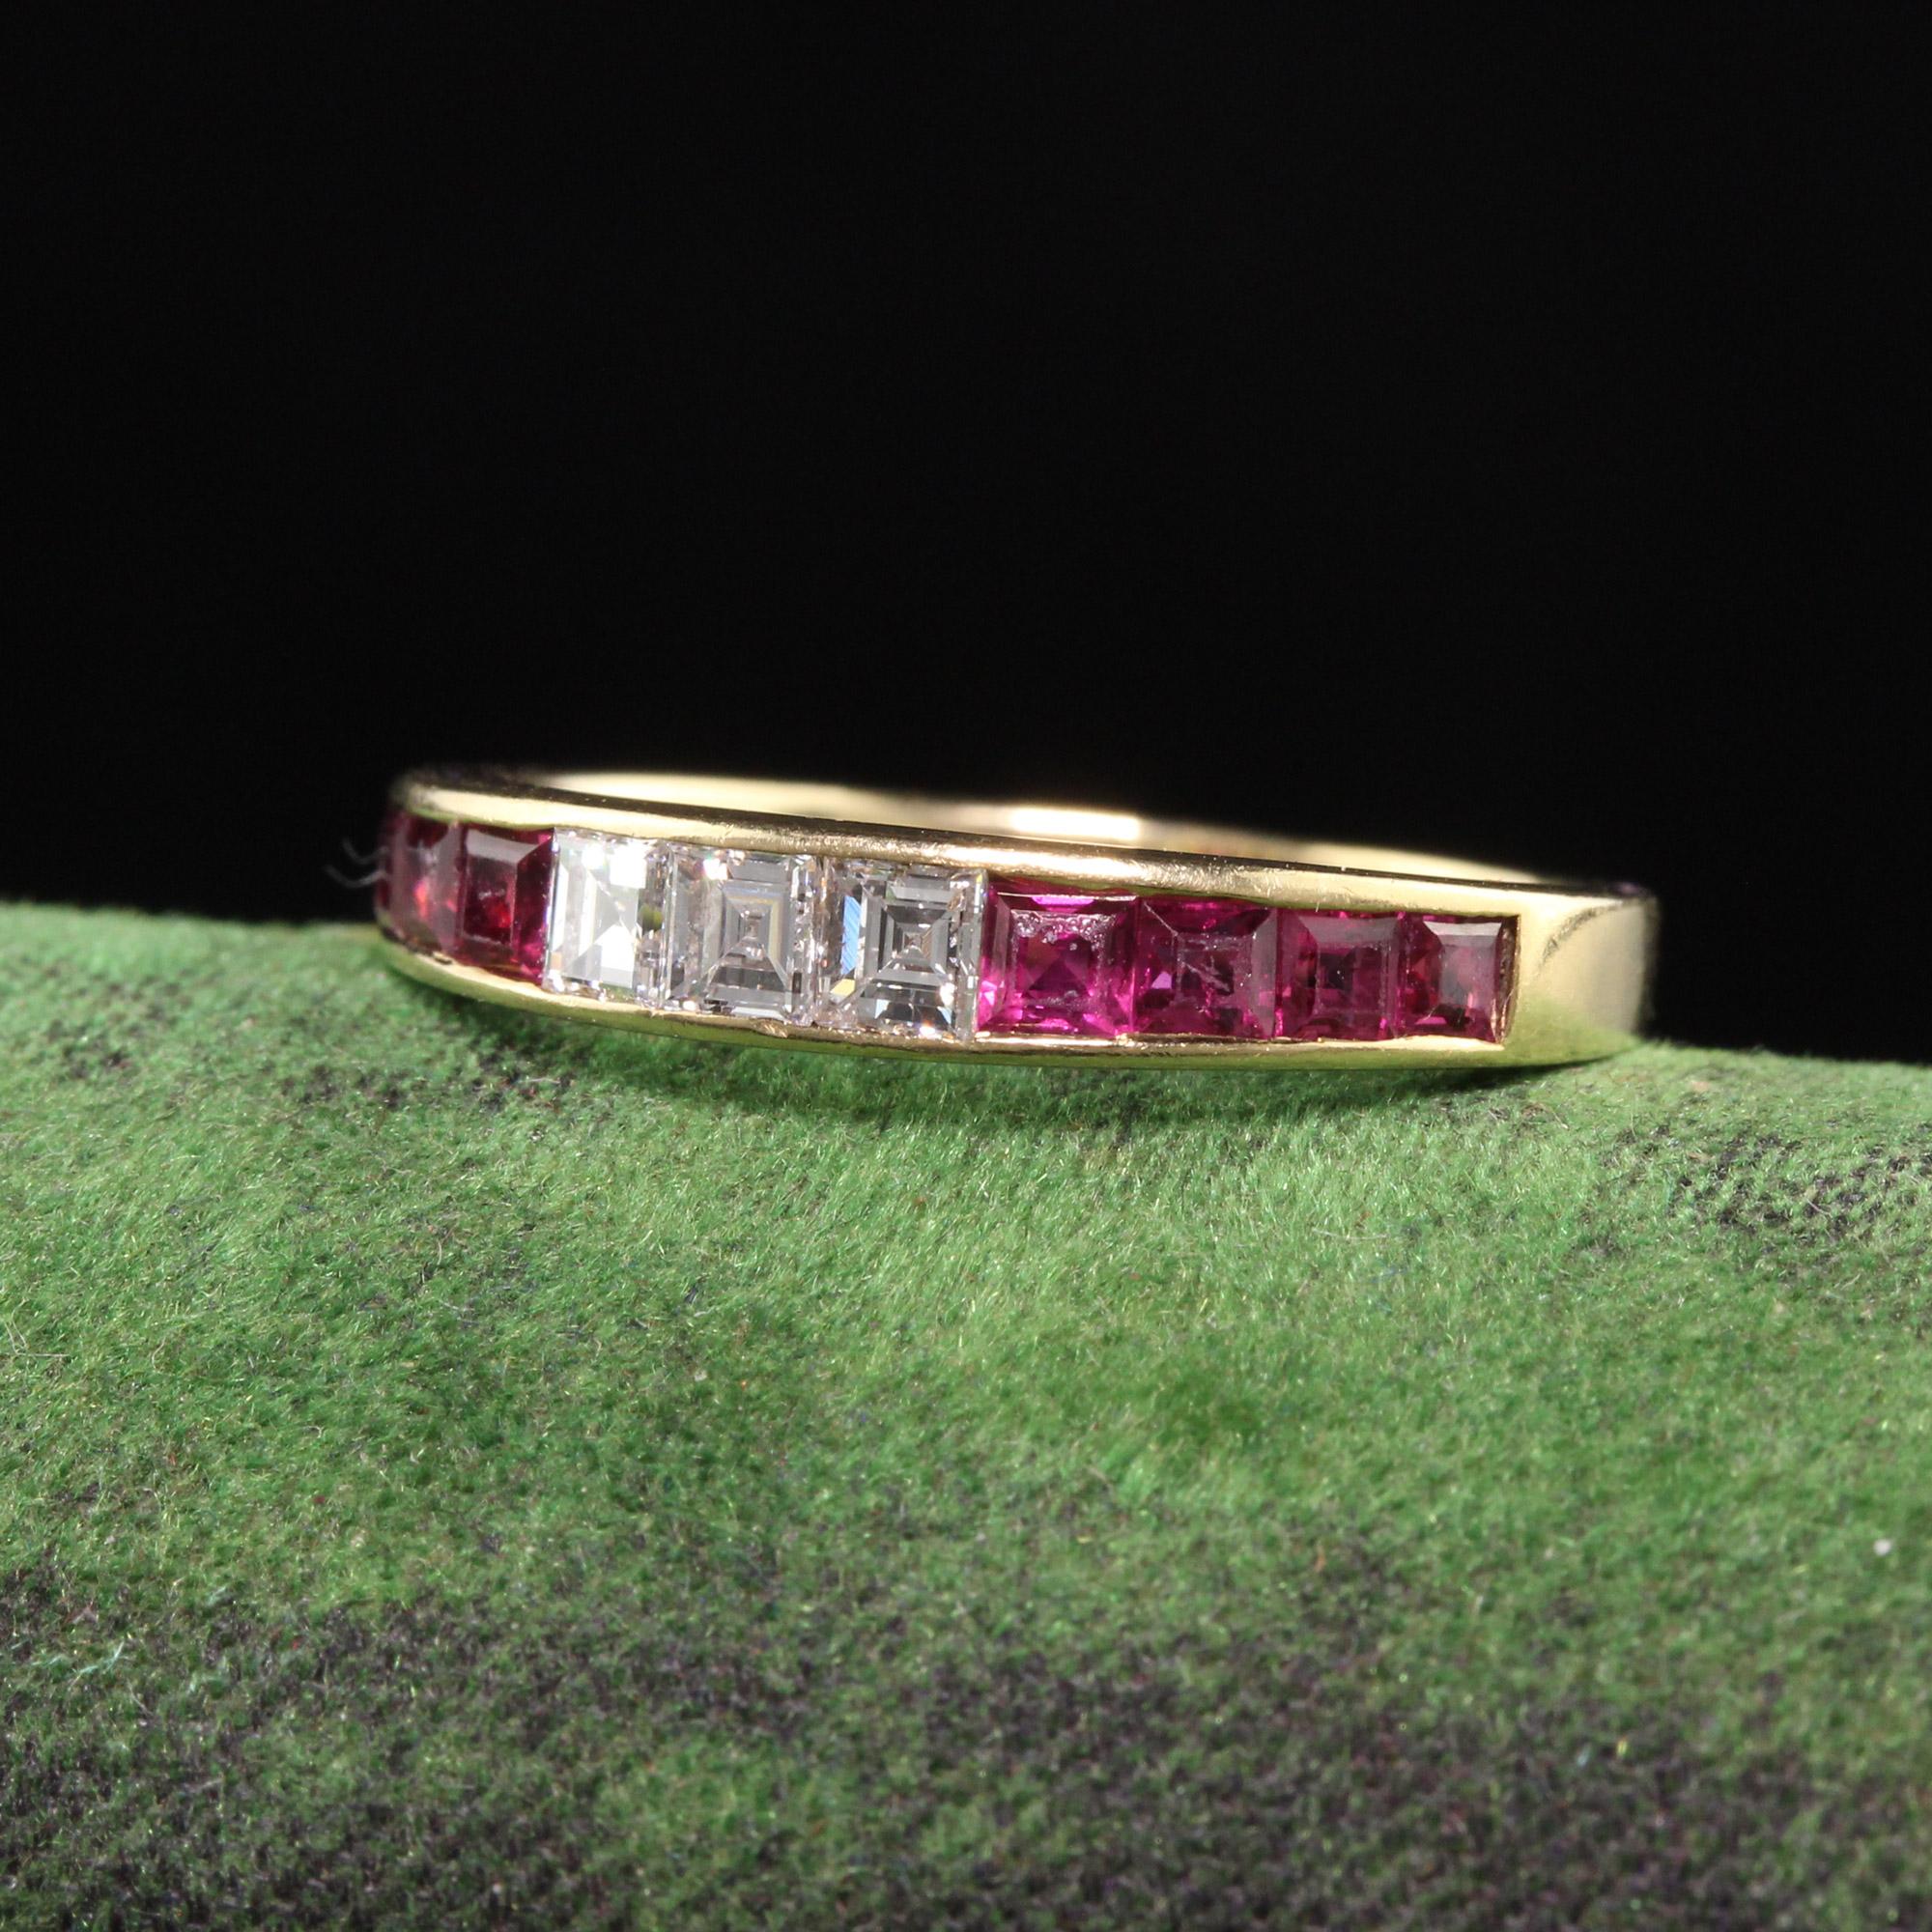 Beautiful Vintage Retro 14K Yellow Gold Ruby and Carre Cut Diamond Band. This classic ruby and diamond band features square cut rubies and carre cut diamonds set in 14K yellow gold.

Item #R0995

Metal: 14K Yellow Gold

Weight: 2.7 Grams

Diamonds: